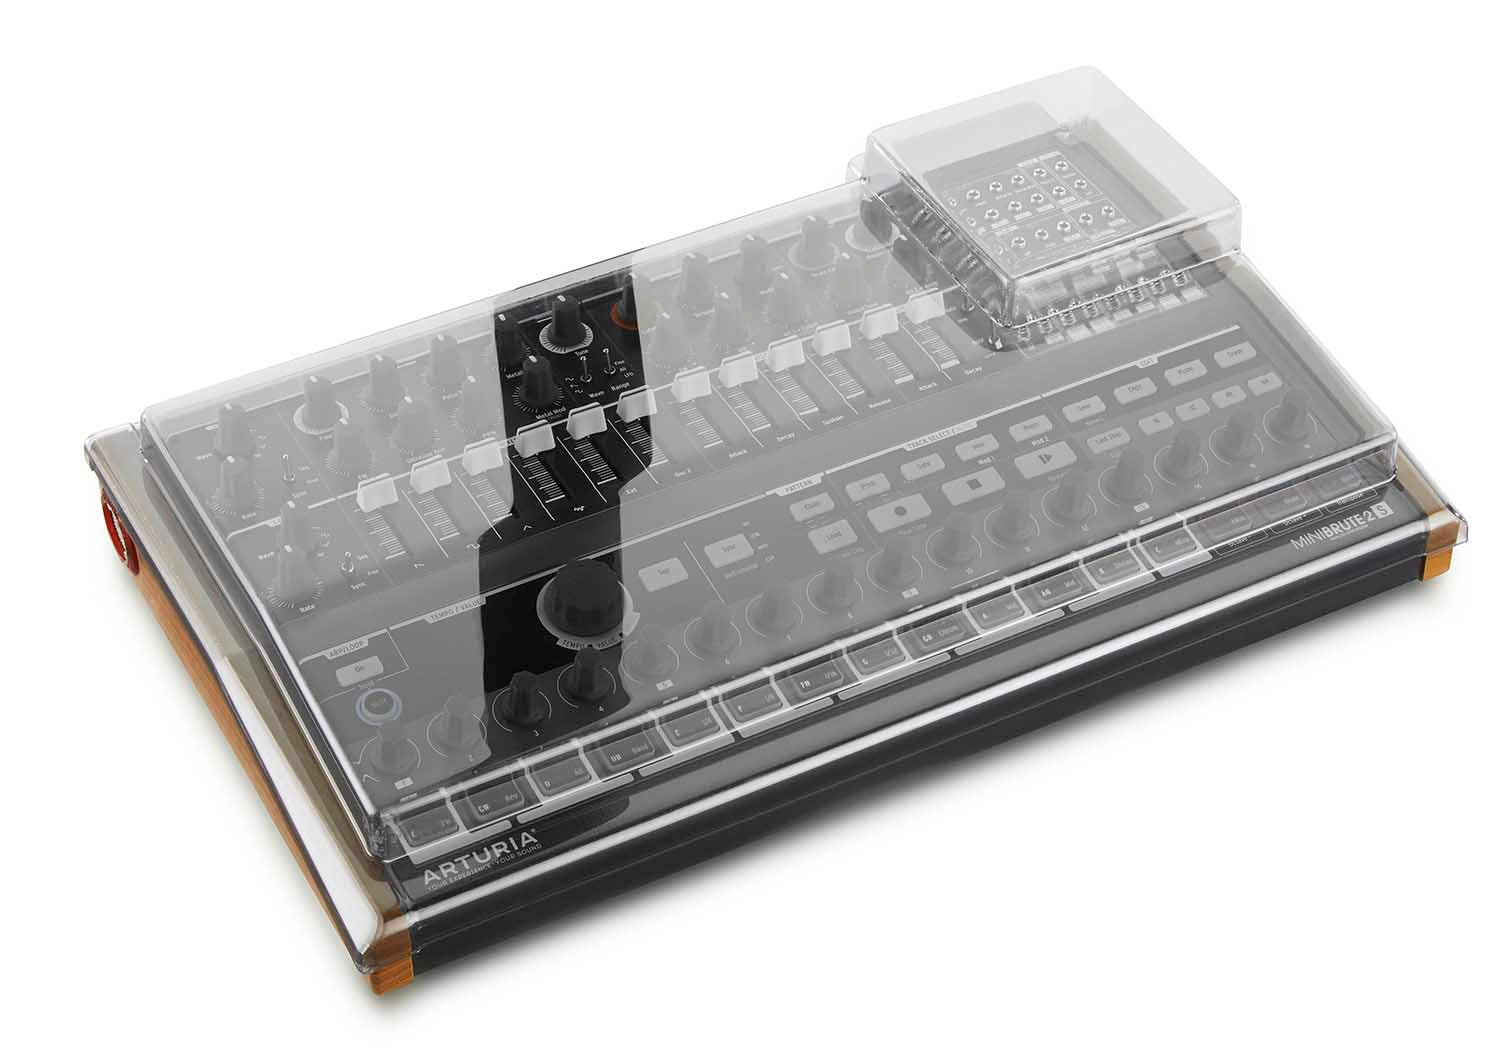 Decksaver DS-PC-MINIBRUTE2S Protection Cover for Arturia Minibrute-2S Synthesizer Decksaver